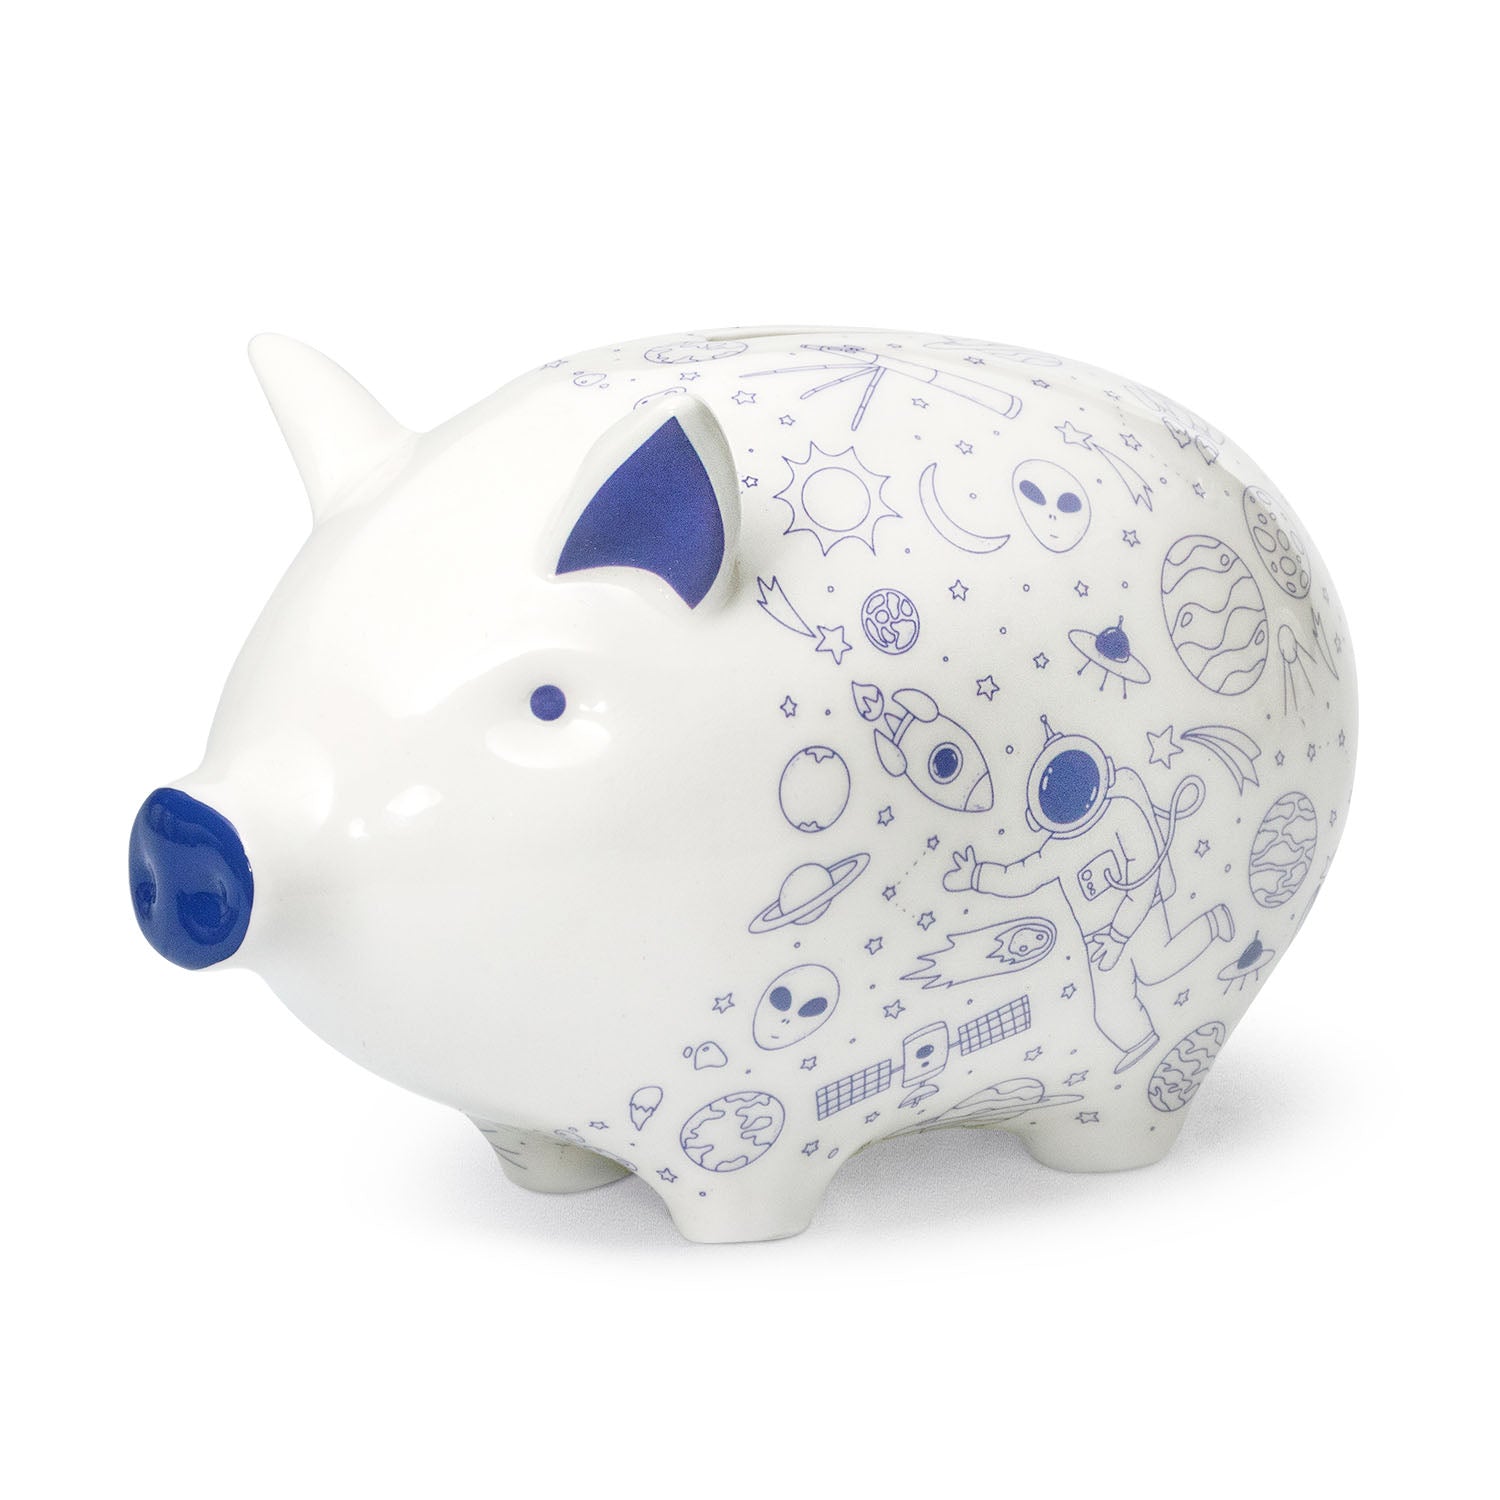 Tilly Pig - Outer Space Piggy Bank